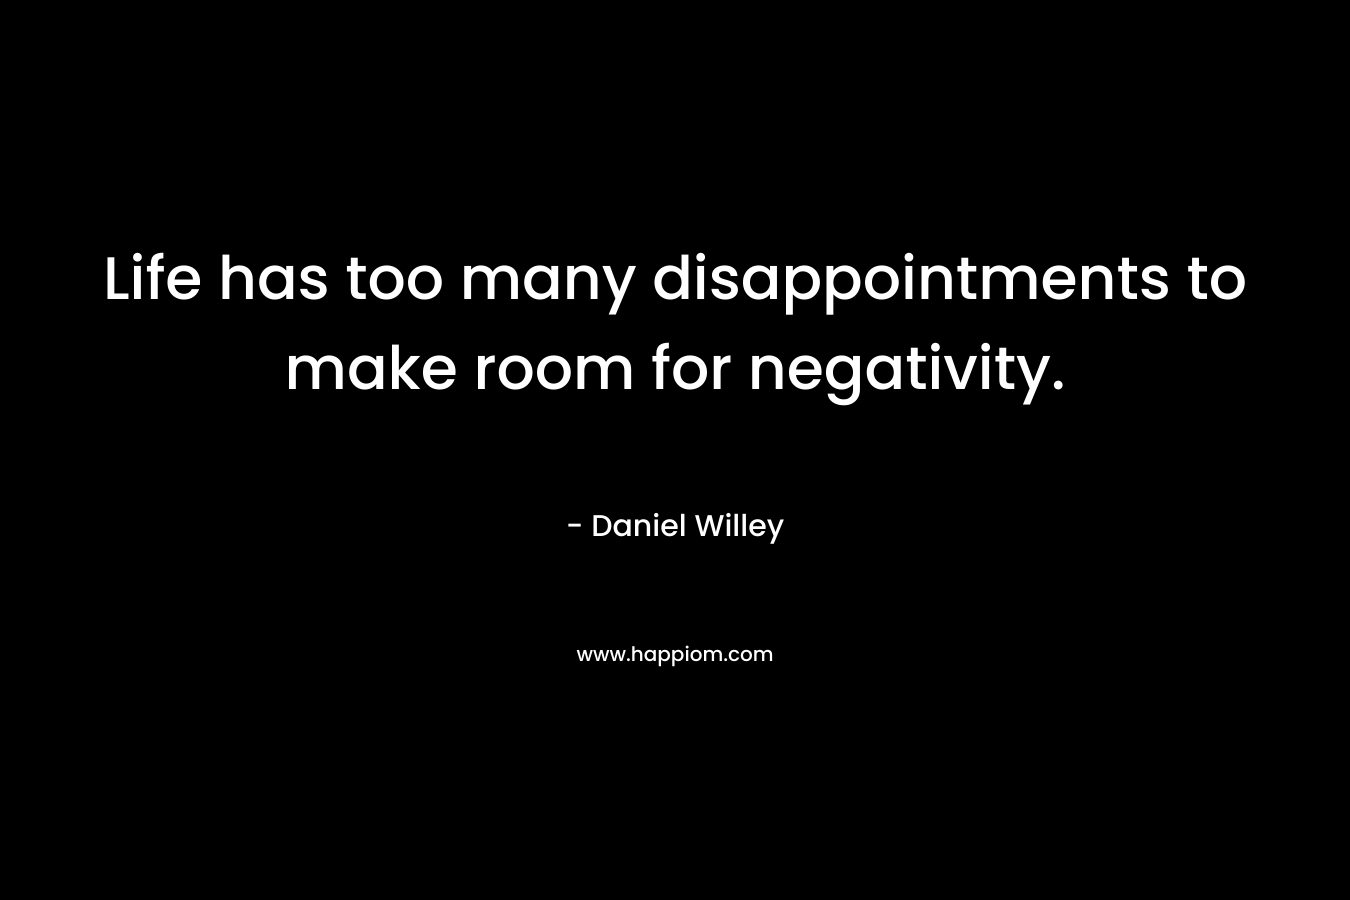 Life has too many disappointments to make room for negativity. – Daniel Willey